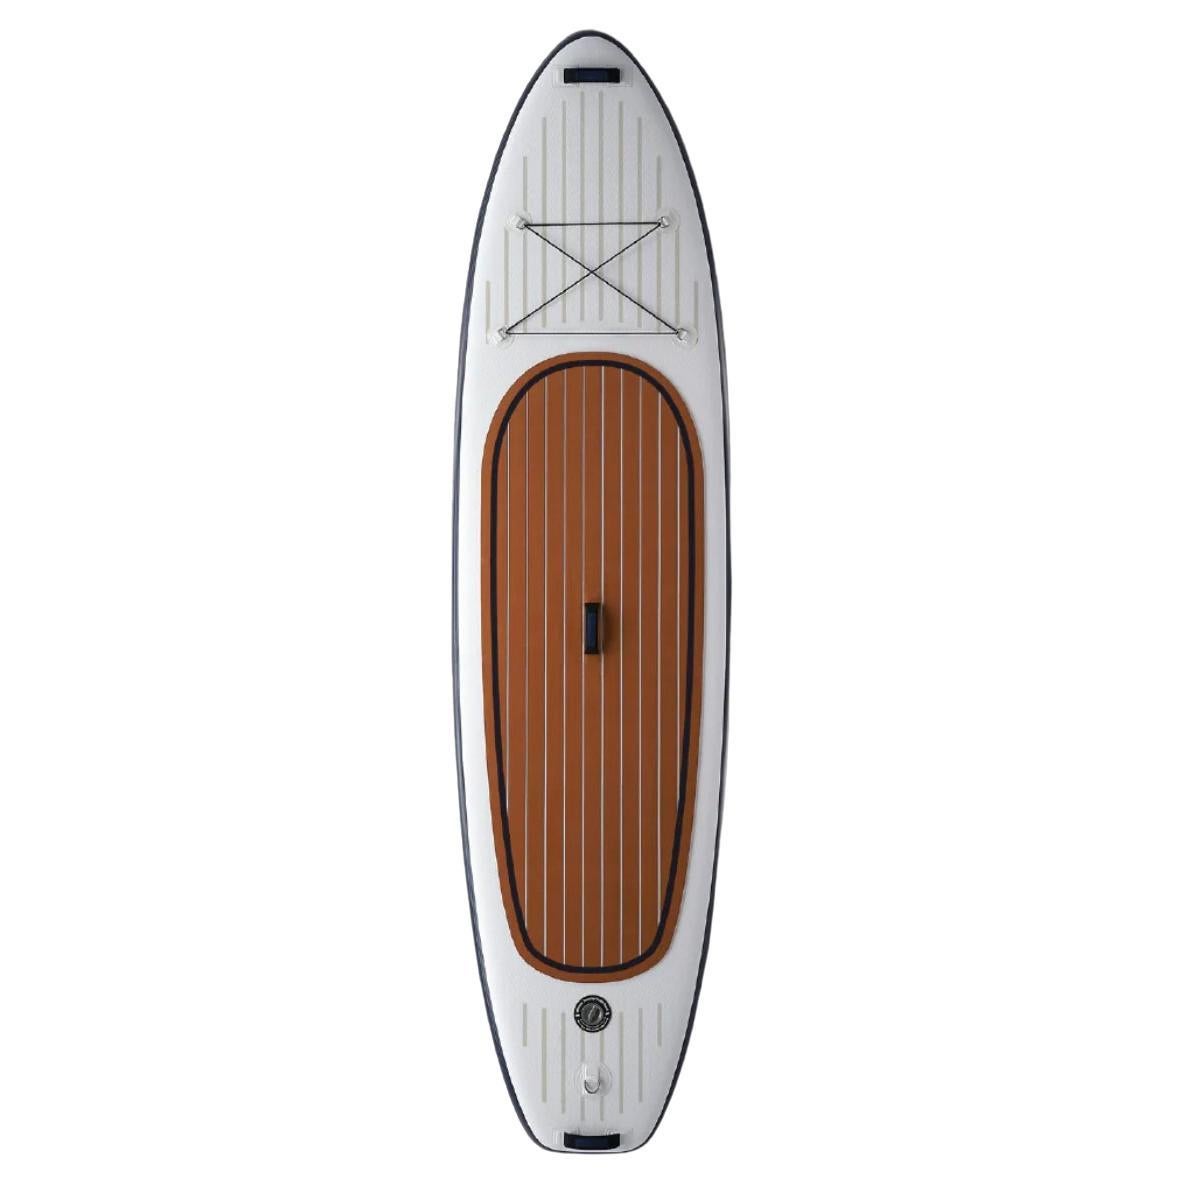 Le Newport Inflatable Stand-Up Paddle Board (ISUP) de Beau Lake 